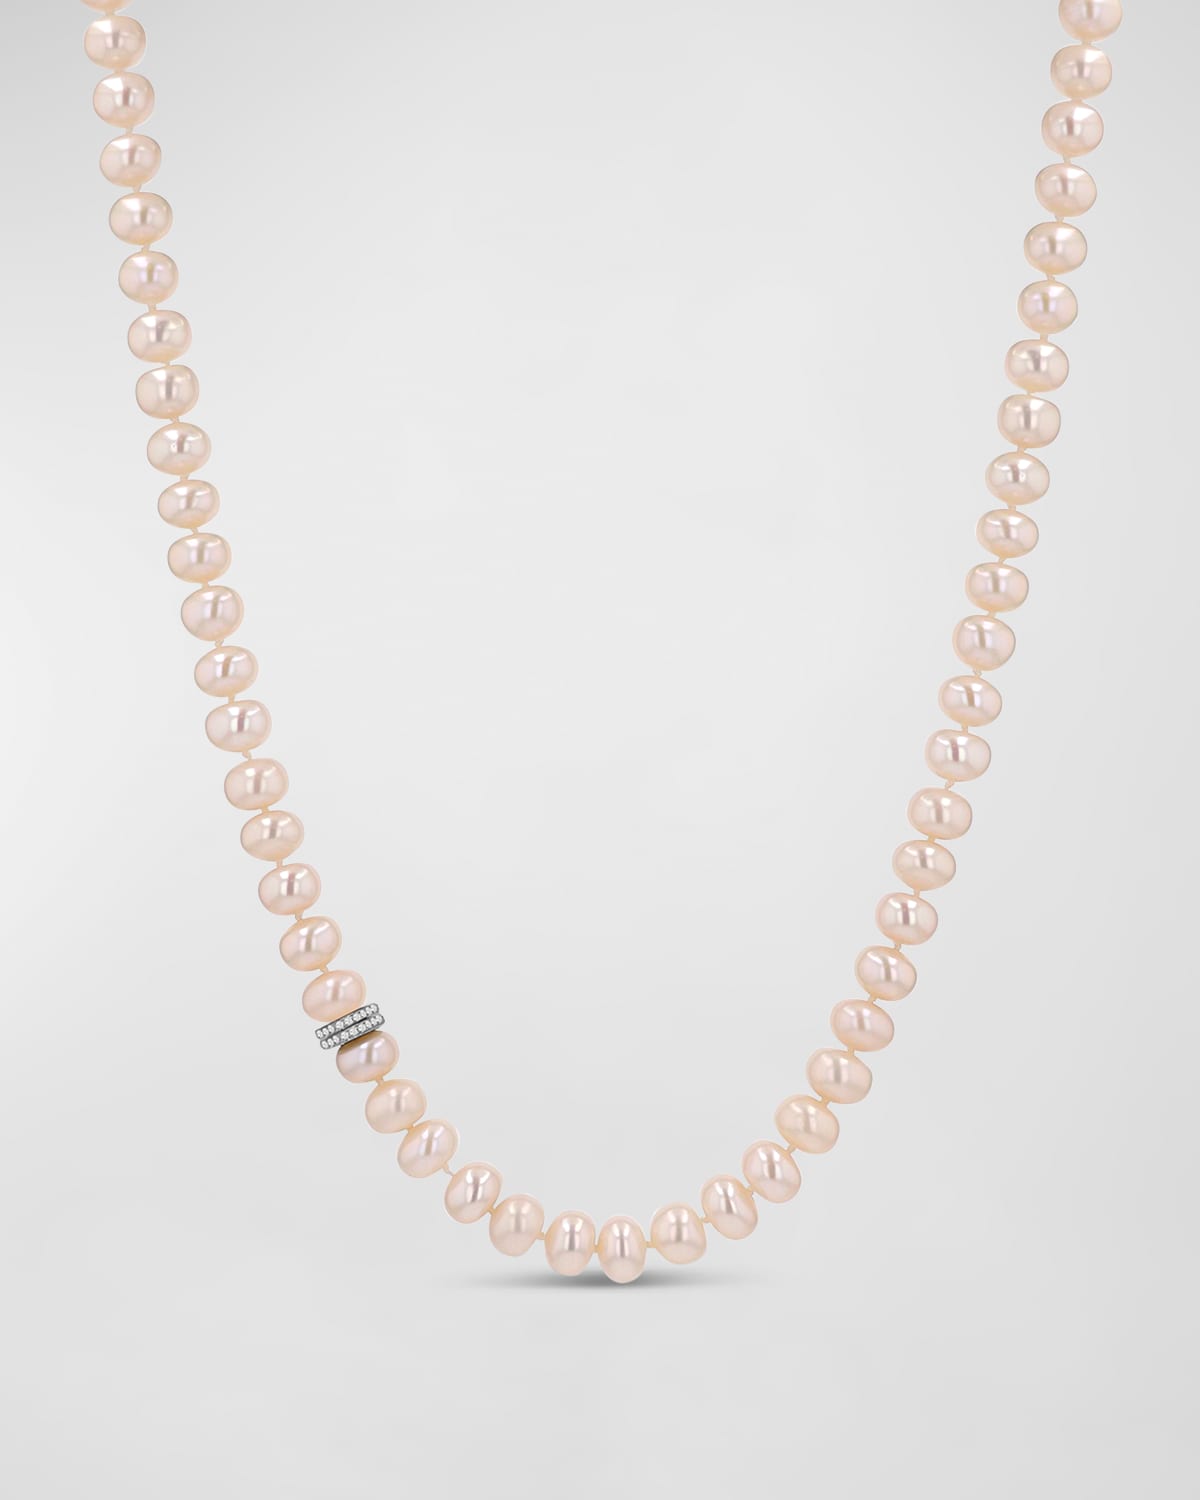 Pearl 8mm Bead Necklace with 2 Diamond Rondelles